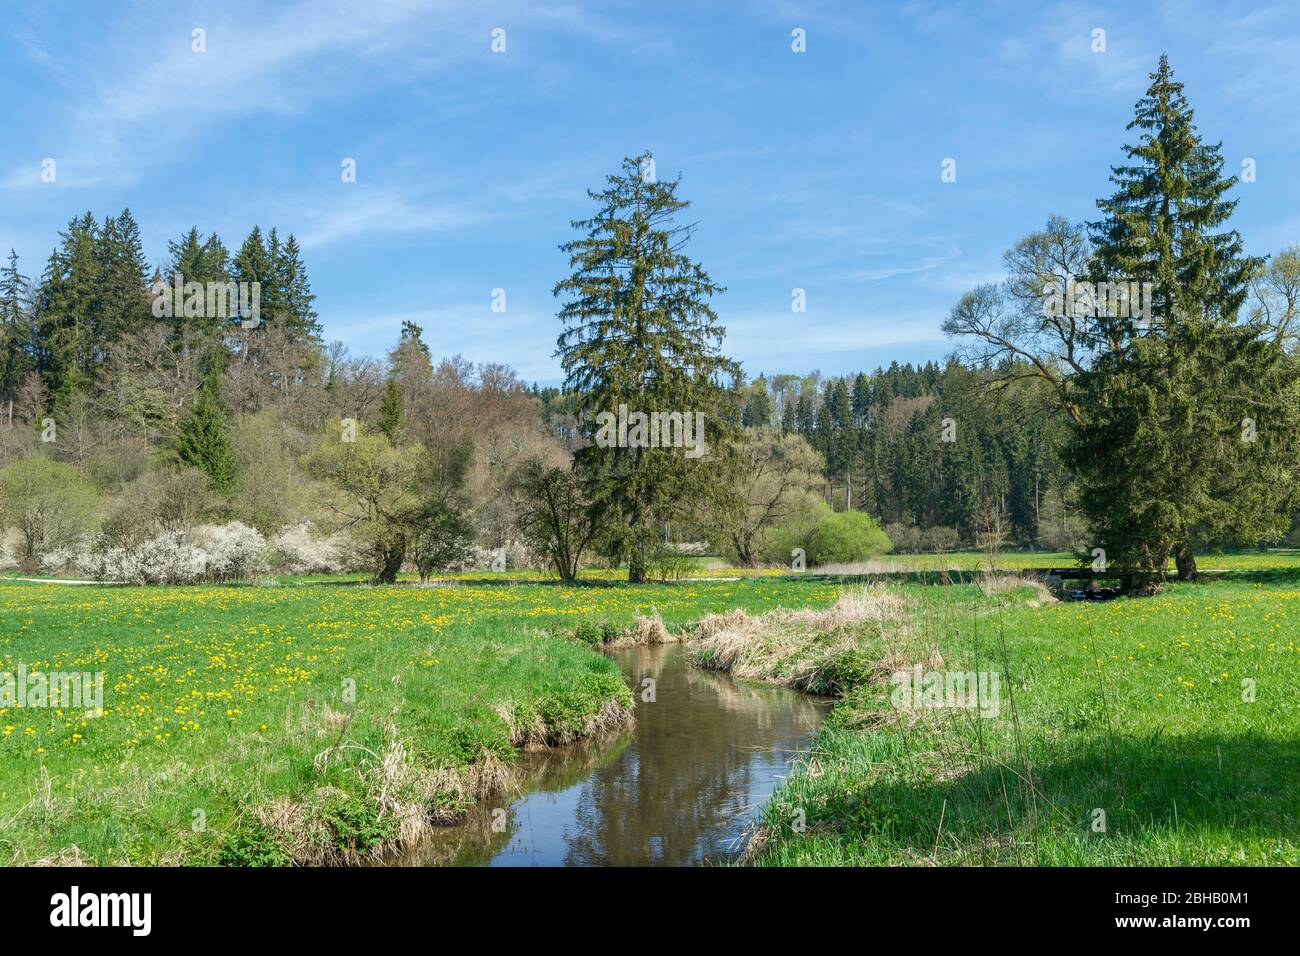 Germany, Baden-Württemberg, Gammertingen, nature reserve Fehlatal, valley of the Fehla, tributary of the Lauchert. The idyllic hiking area is located in the Geopark Swabian Alb. Stock Photo